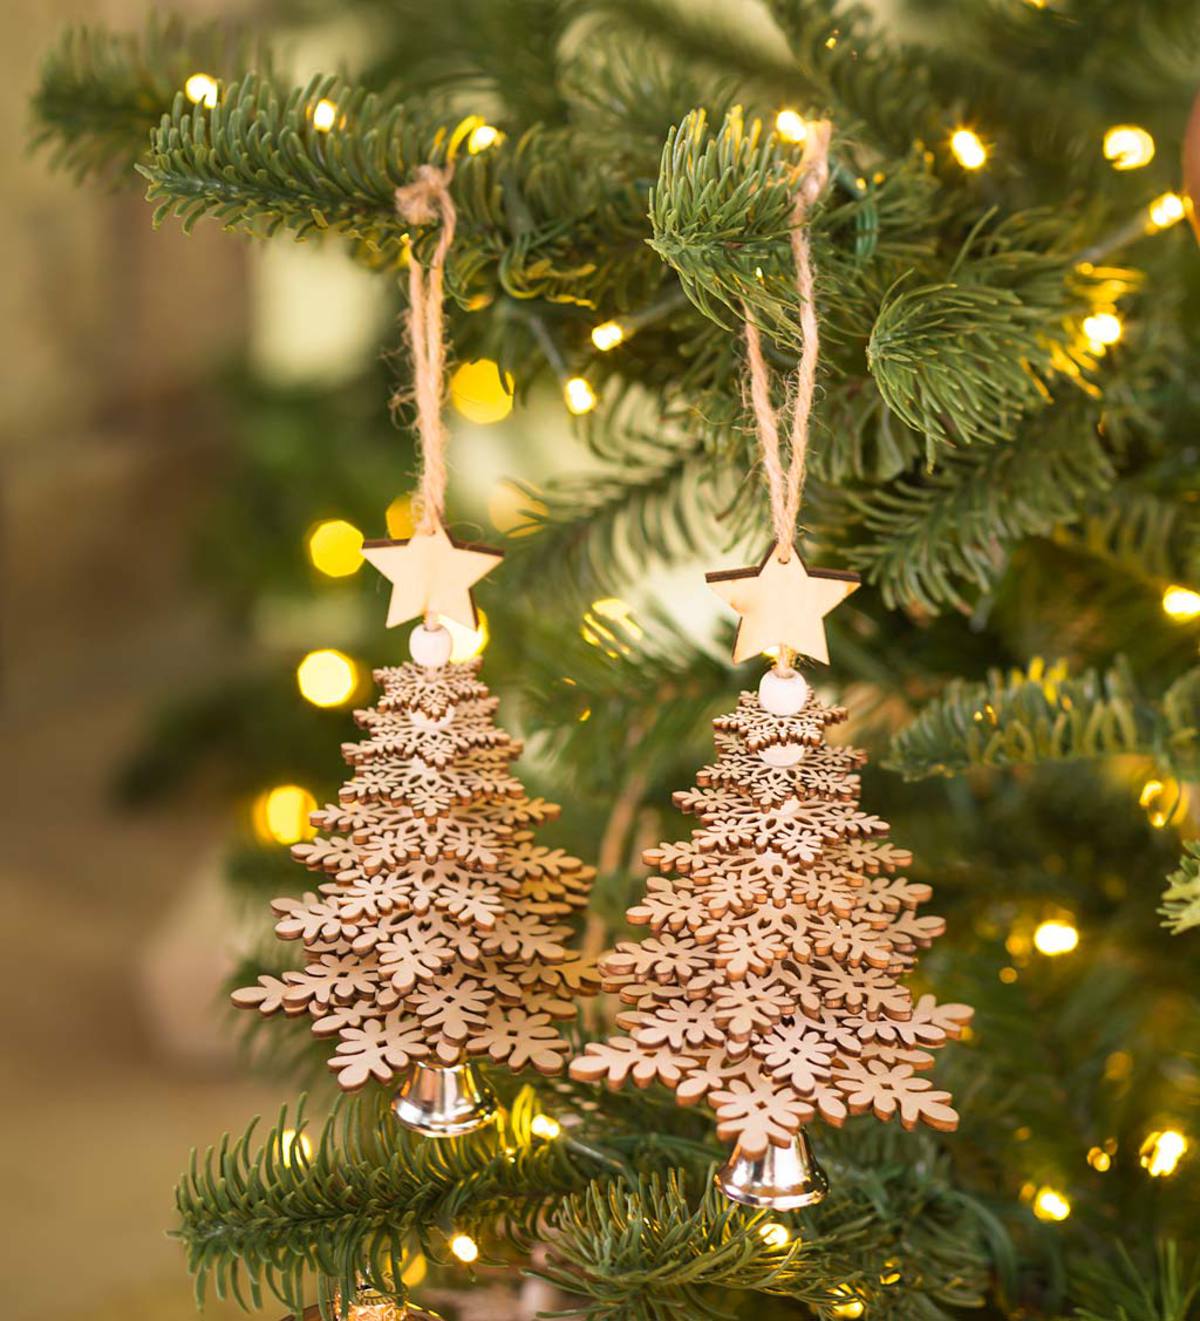 Wooden Christmas Tree Ornaments, Set of 2